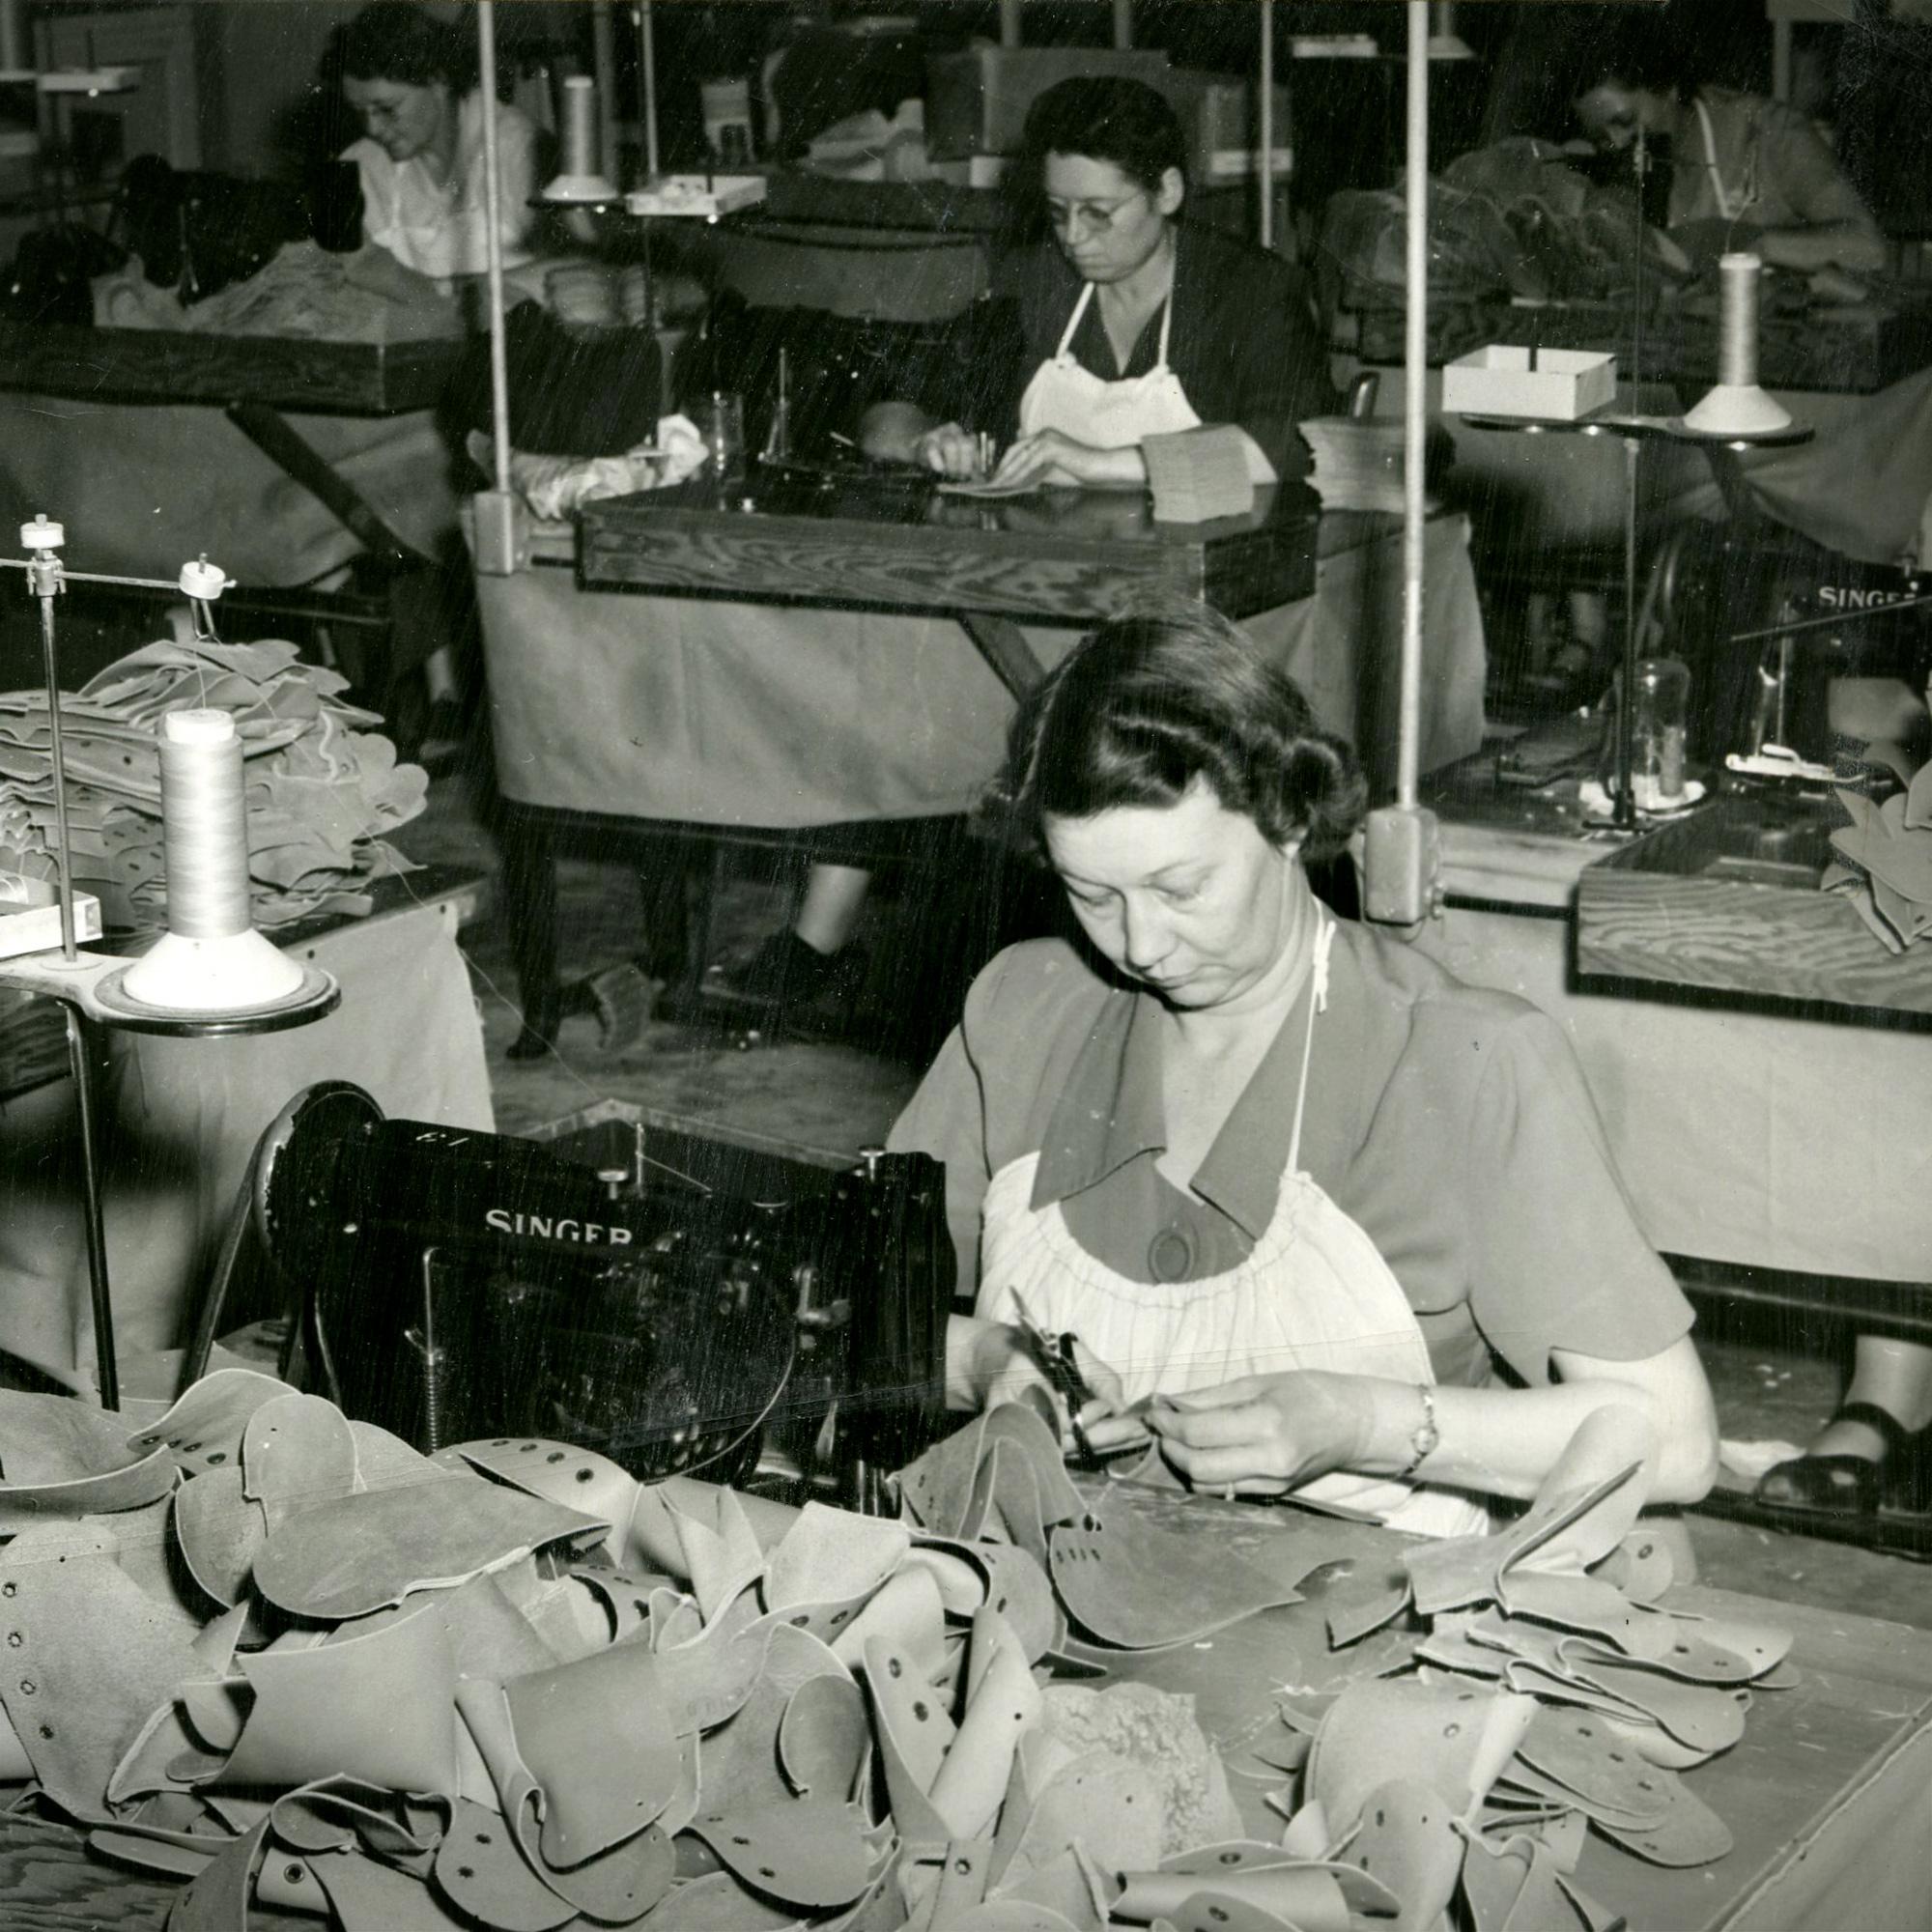 A sewing machine operator at the factory in the 50s.